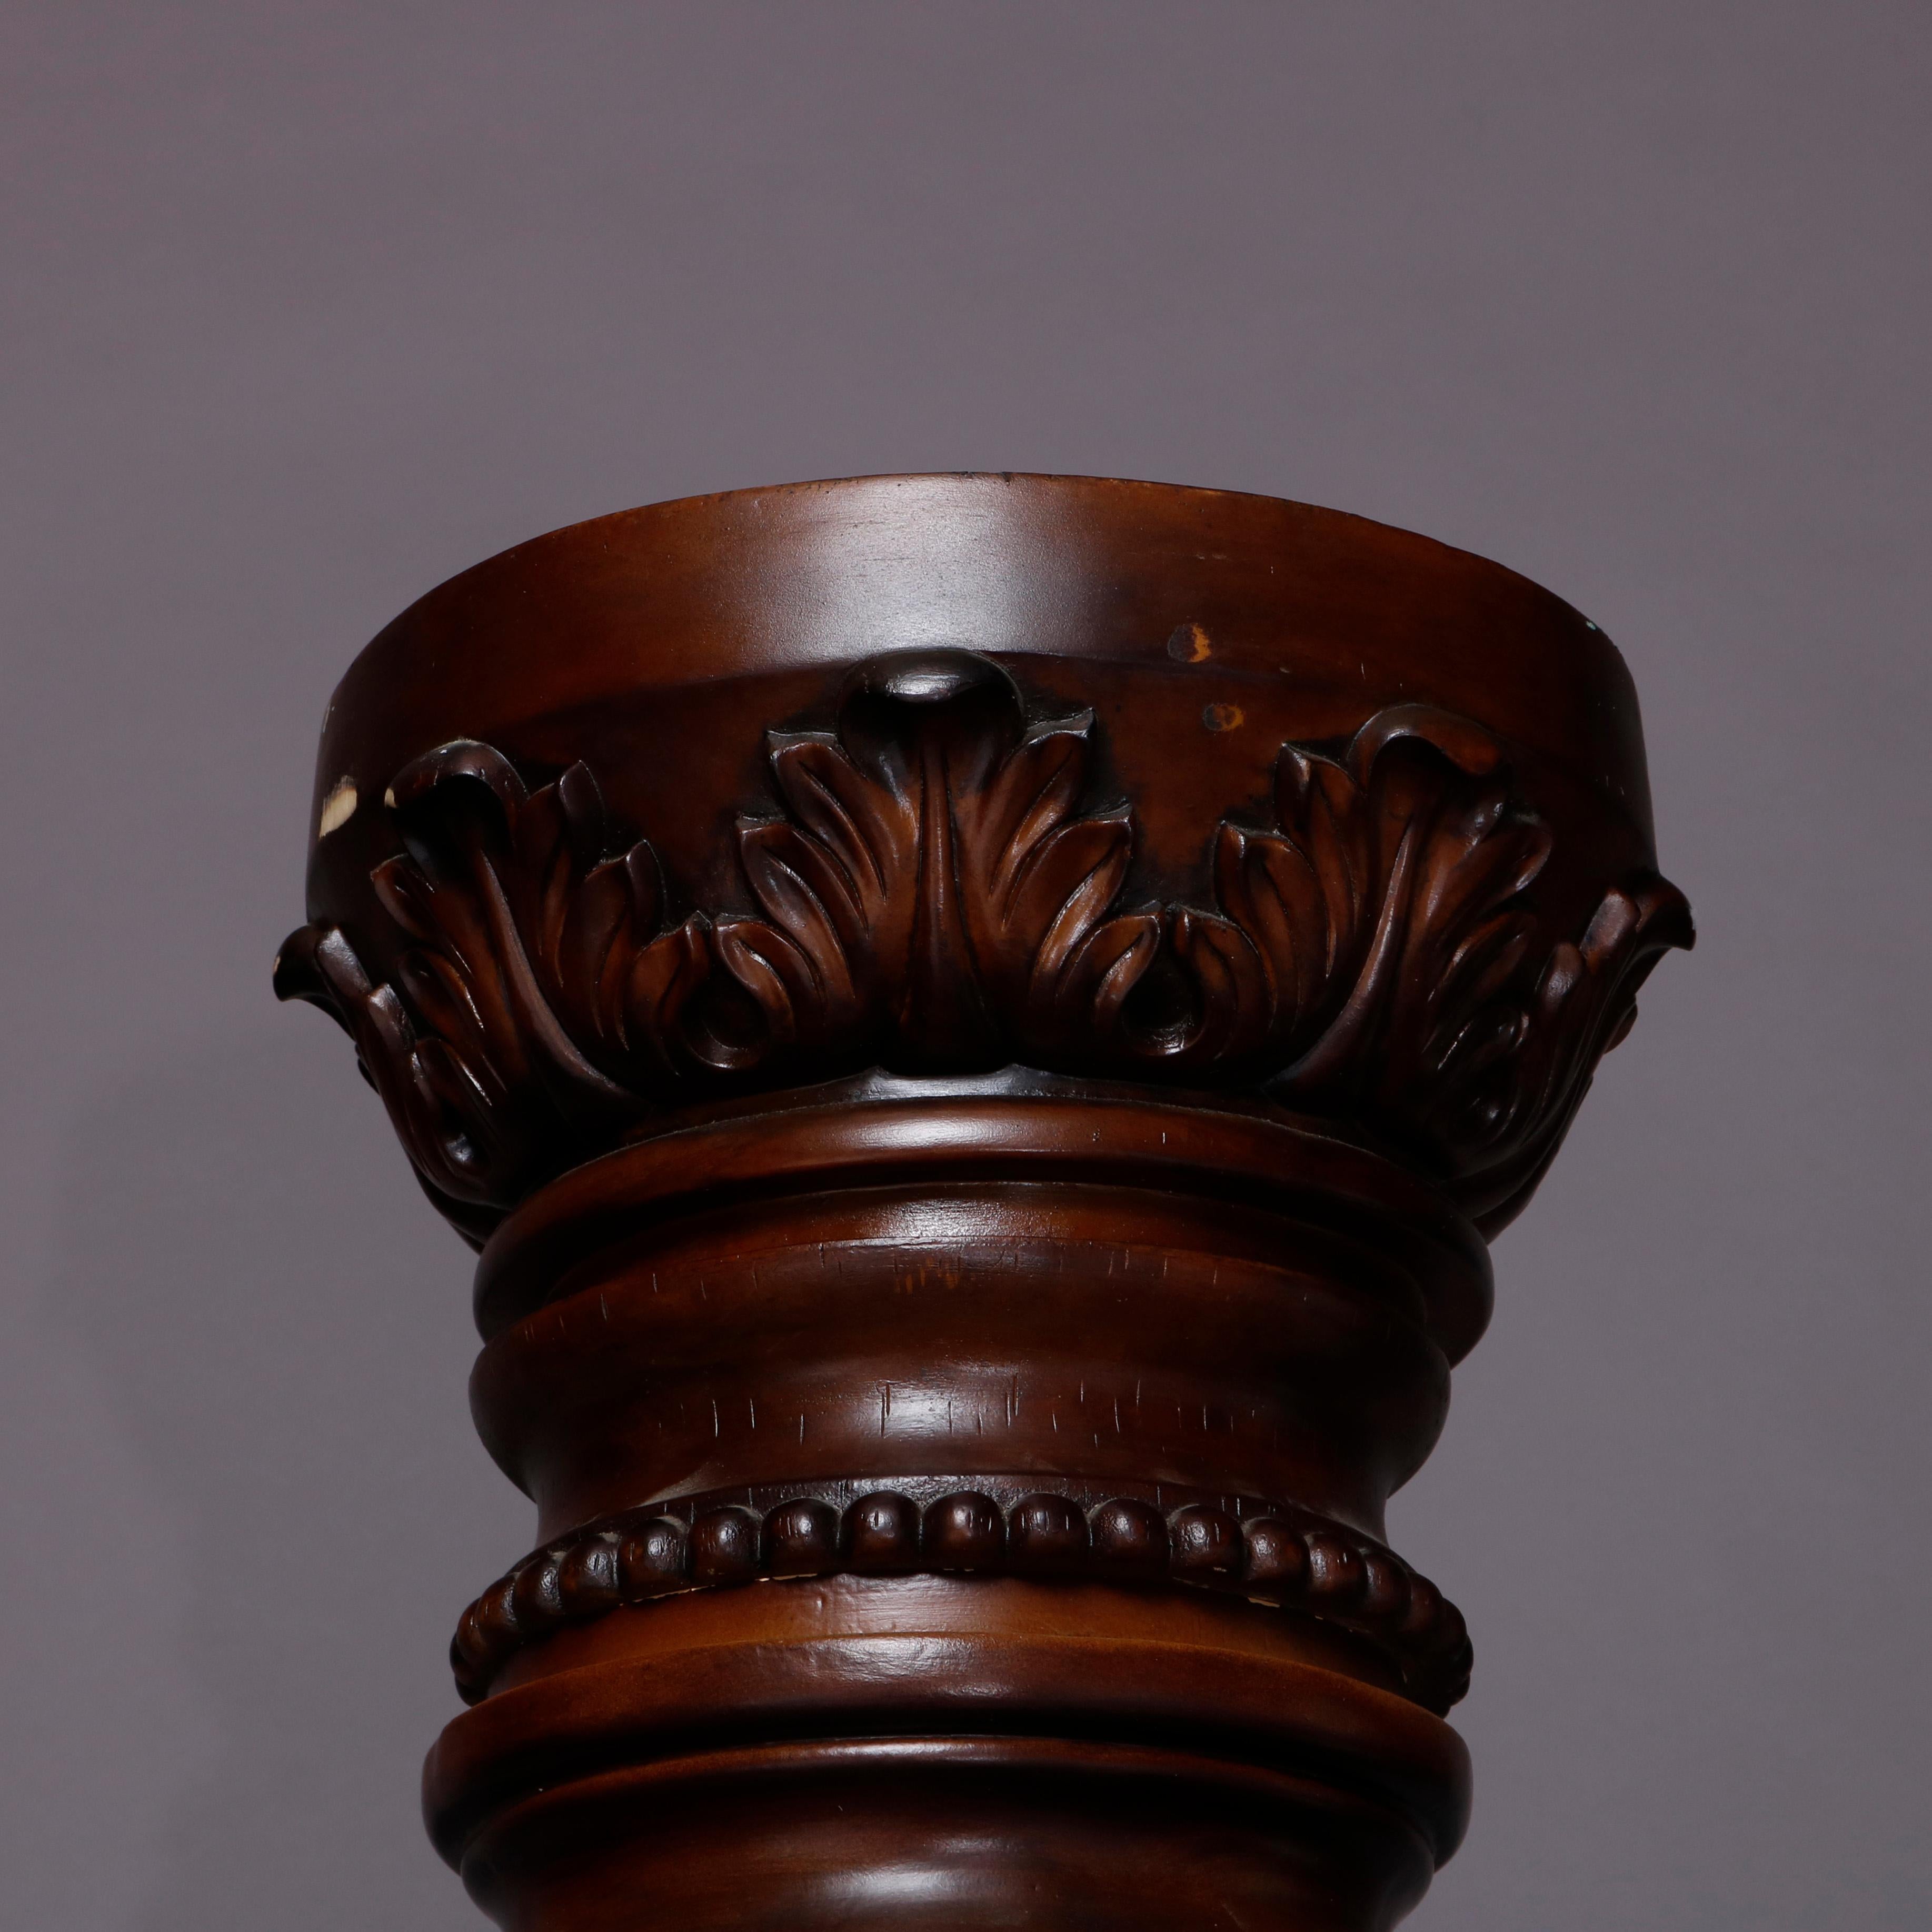 A pair of oversized architectural column offer mahogany and composite construction with twisted foliate decoration and raised on paneled bases, 20th century.

***DELIVERY NOTICE – Due to COVID-19 we have employed LIMITED-TO-NO-CONTACT PRACTICES in